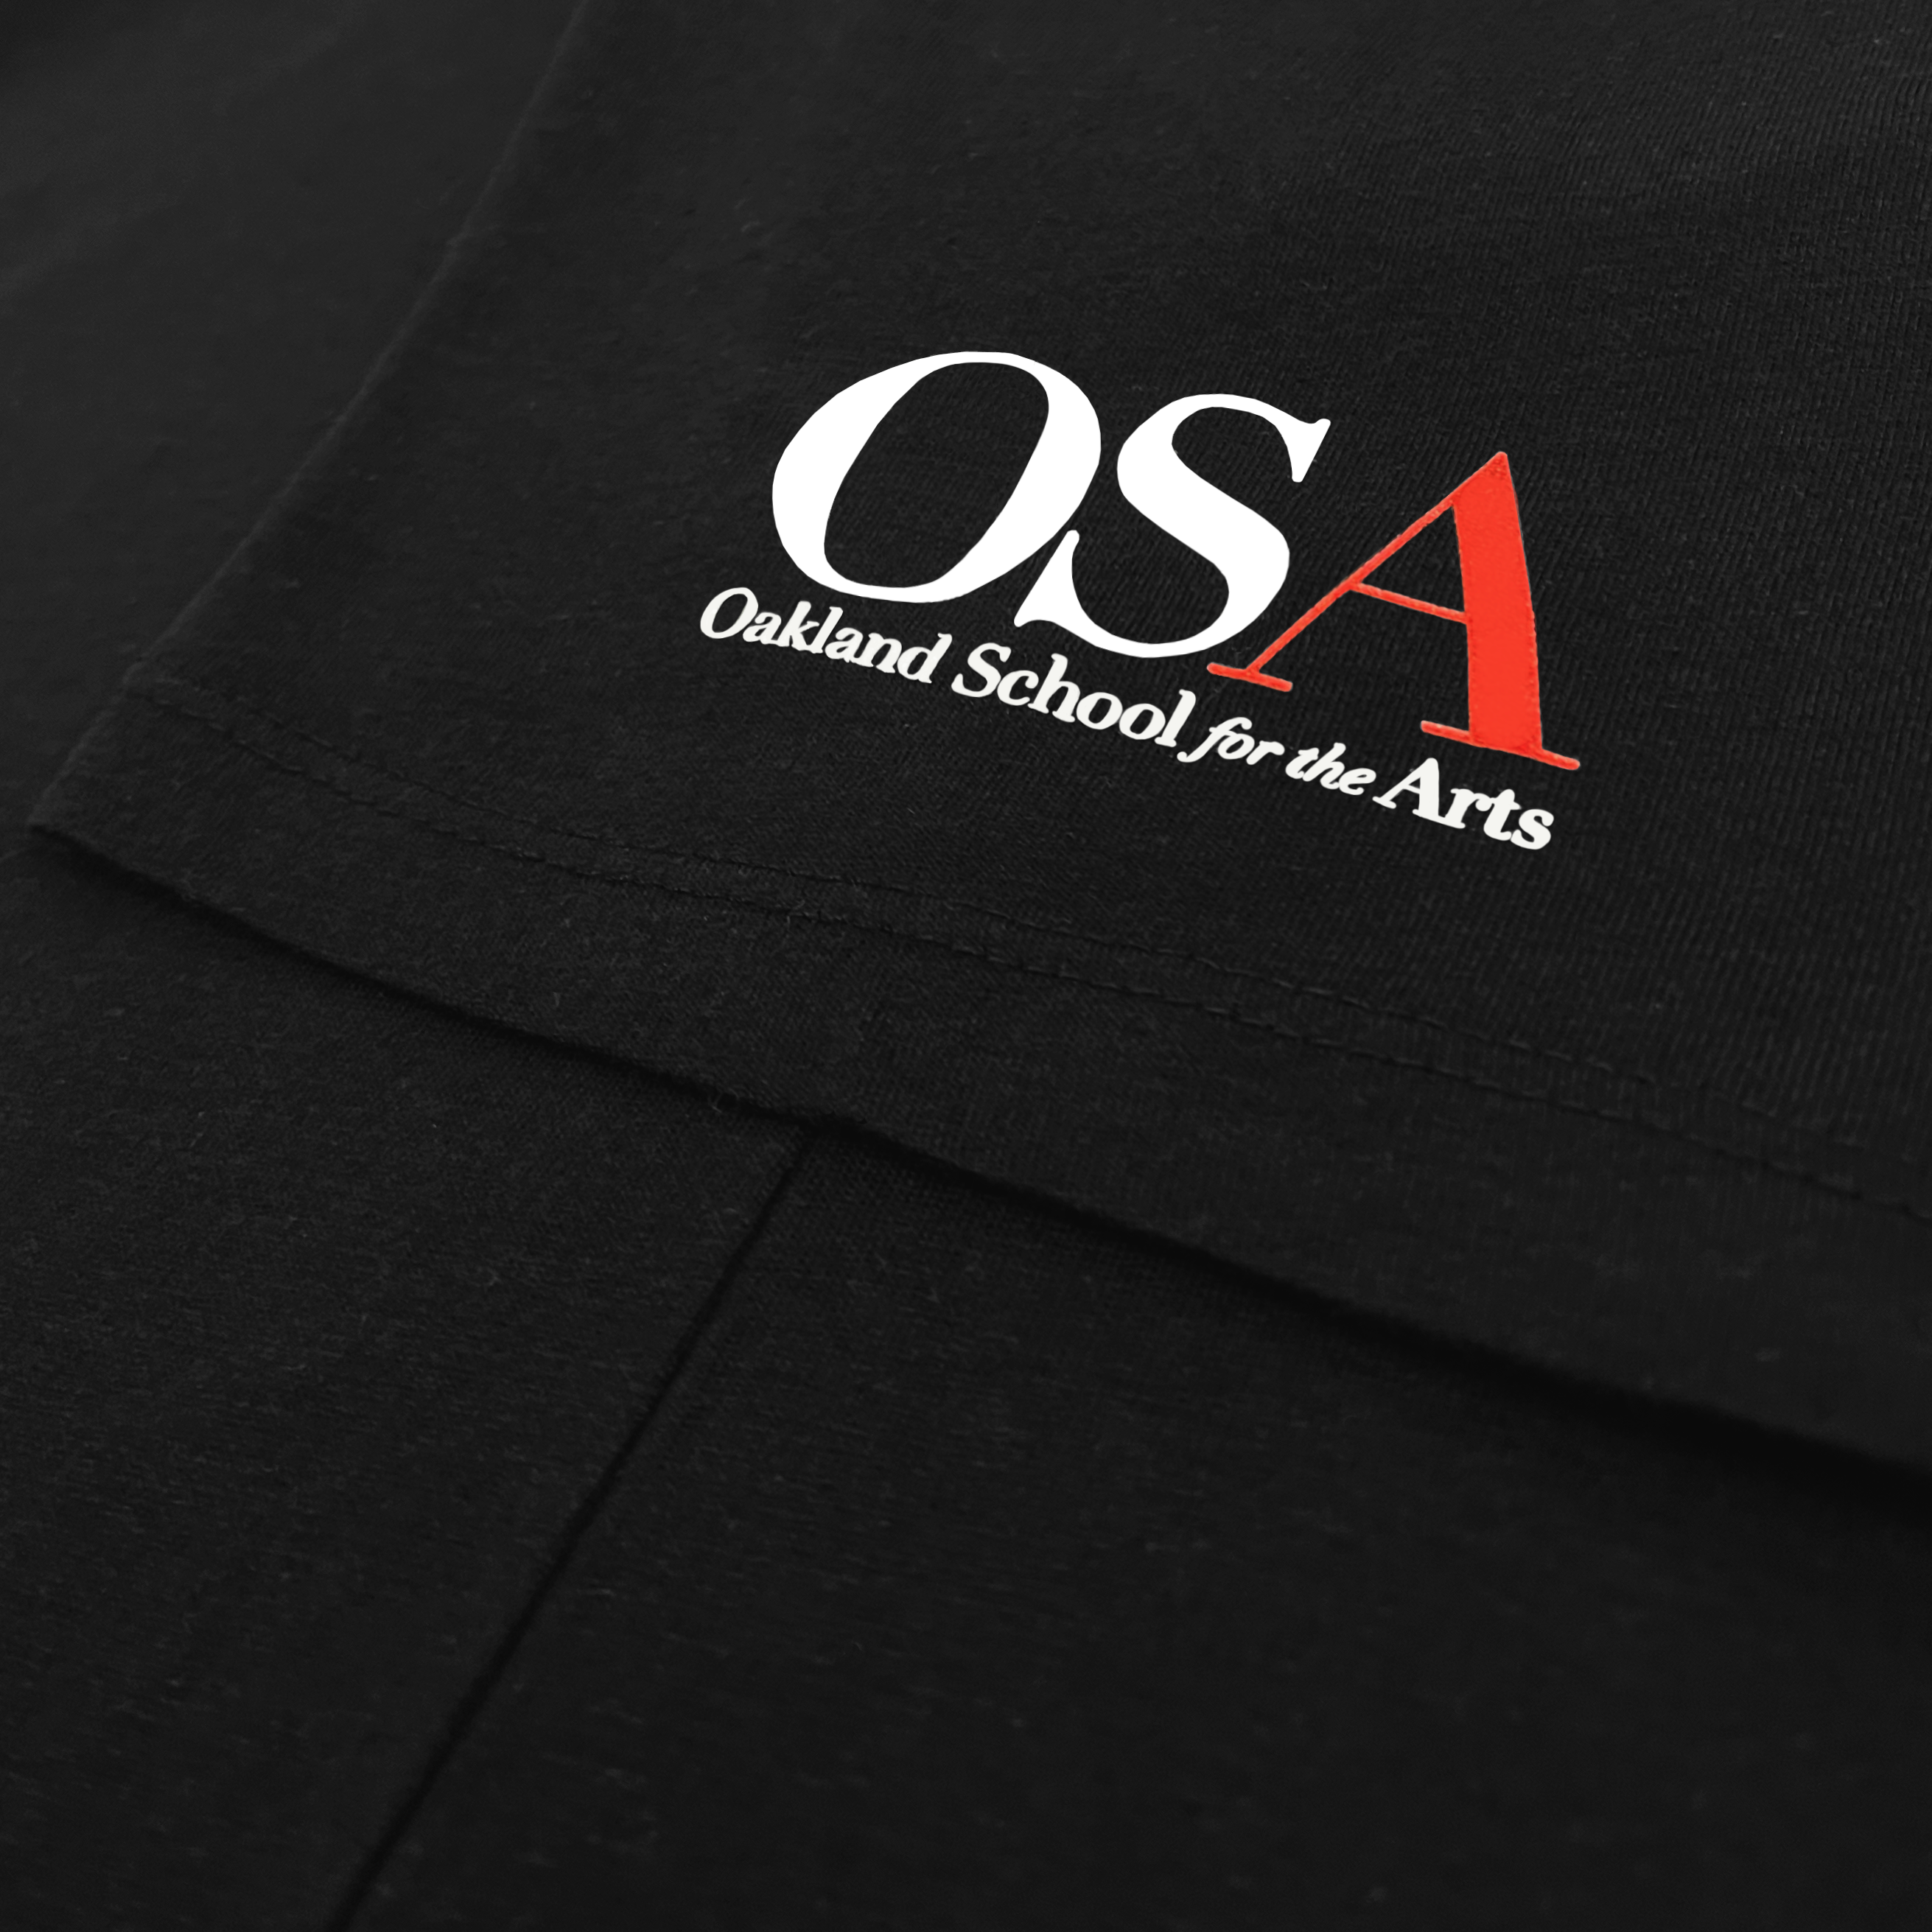 Close-up of the sleeve of a black t-shirt with OSA, Oakland School for the Arts logo and wordmark.